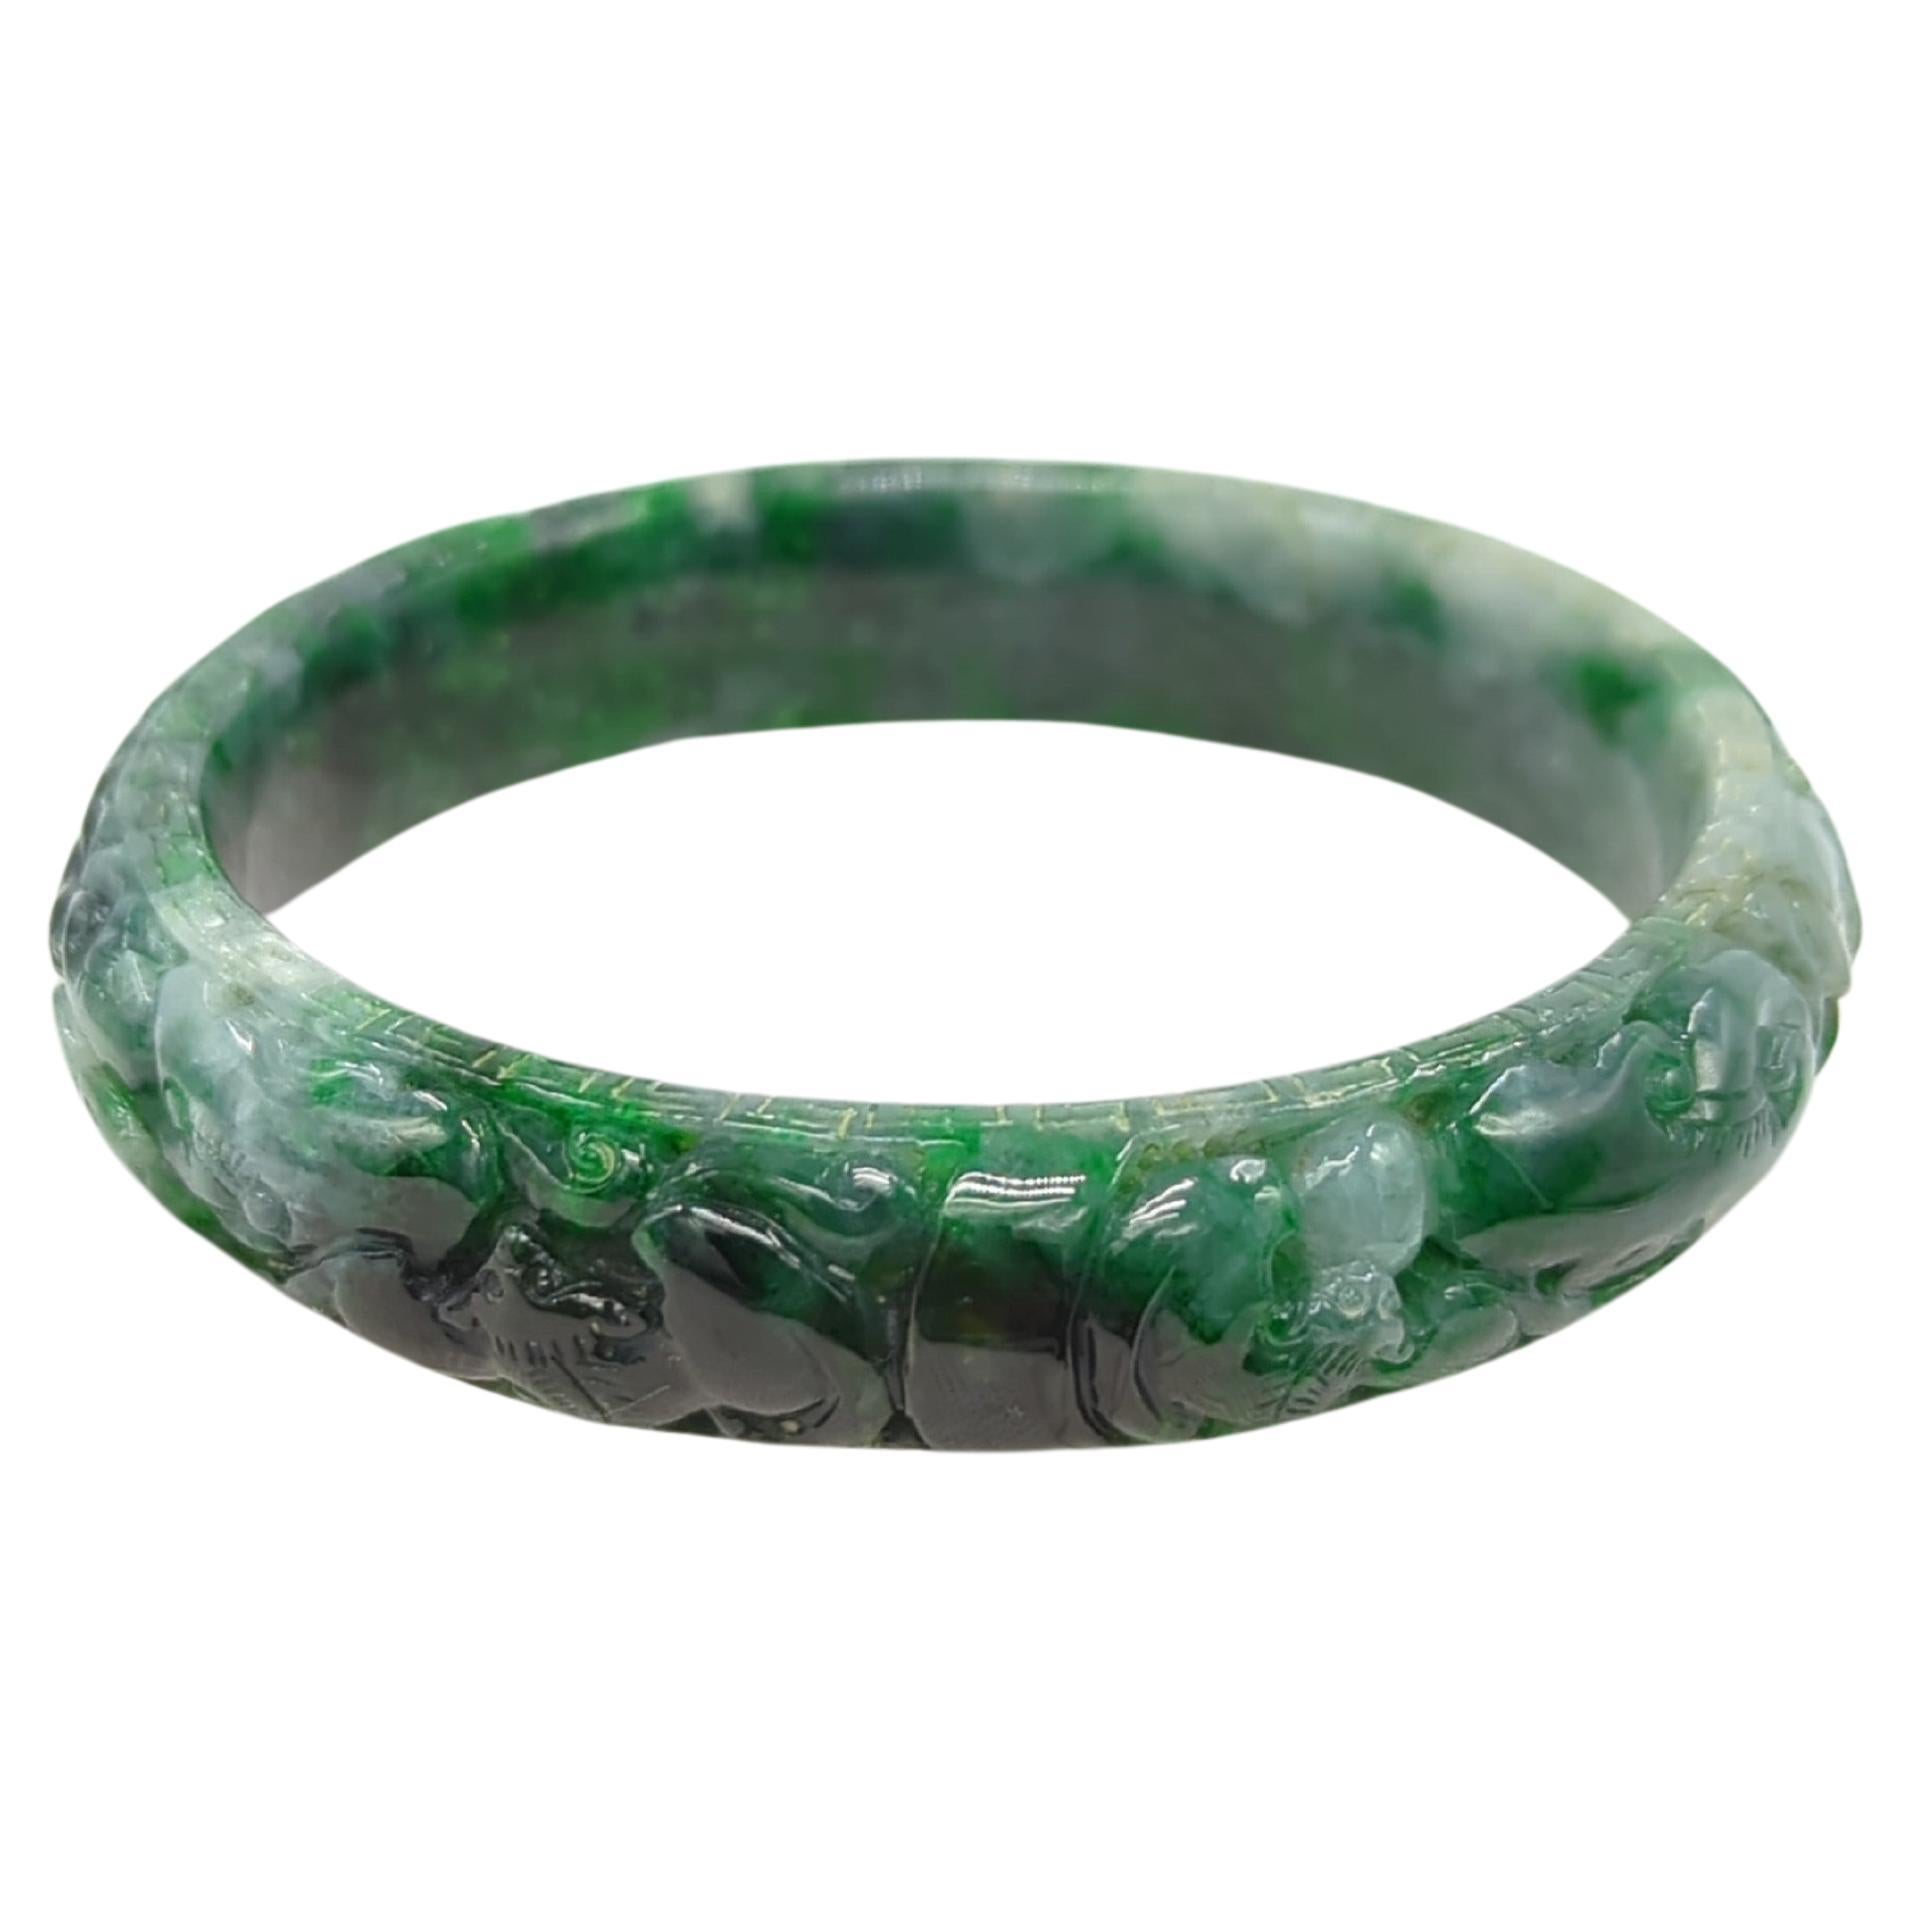 A vintage Chinese heavily carved natural jadeite bangle, displaying rich natural mottled colors including pale green, emerald to dark ink green.

ID: 60mm
OD: 76mm
Width: 14mm
Weight: 54.5grams
Grade: A-grade jadeite, no enhancements, completely